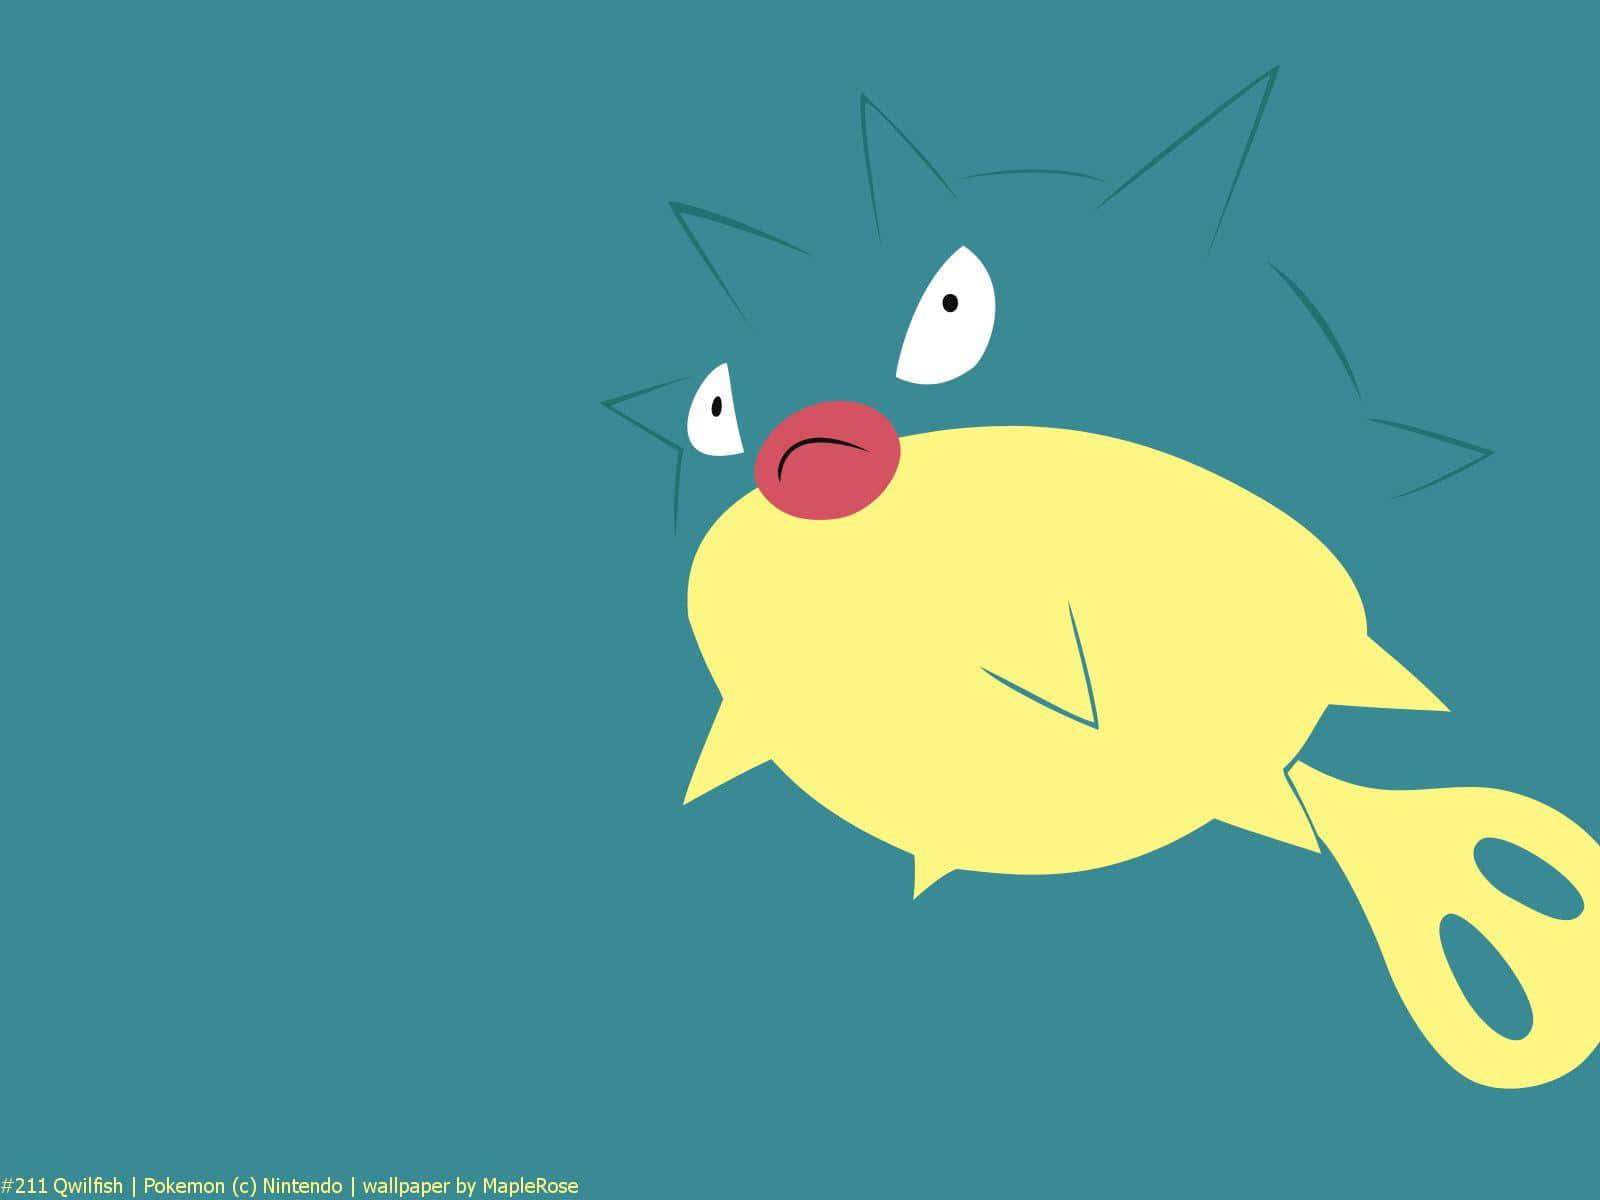 Minimalist Qwilfish With A Teal Aesthetic Wallpaper